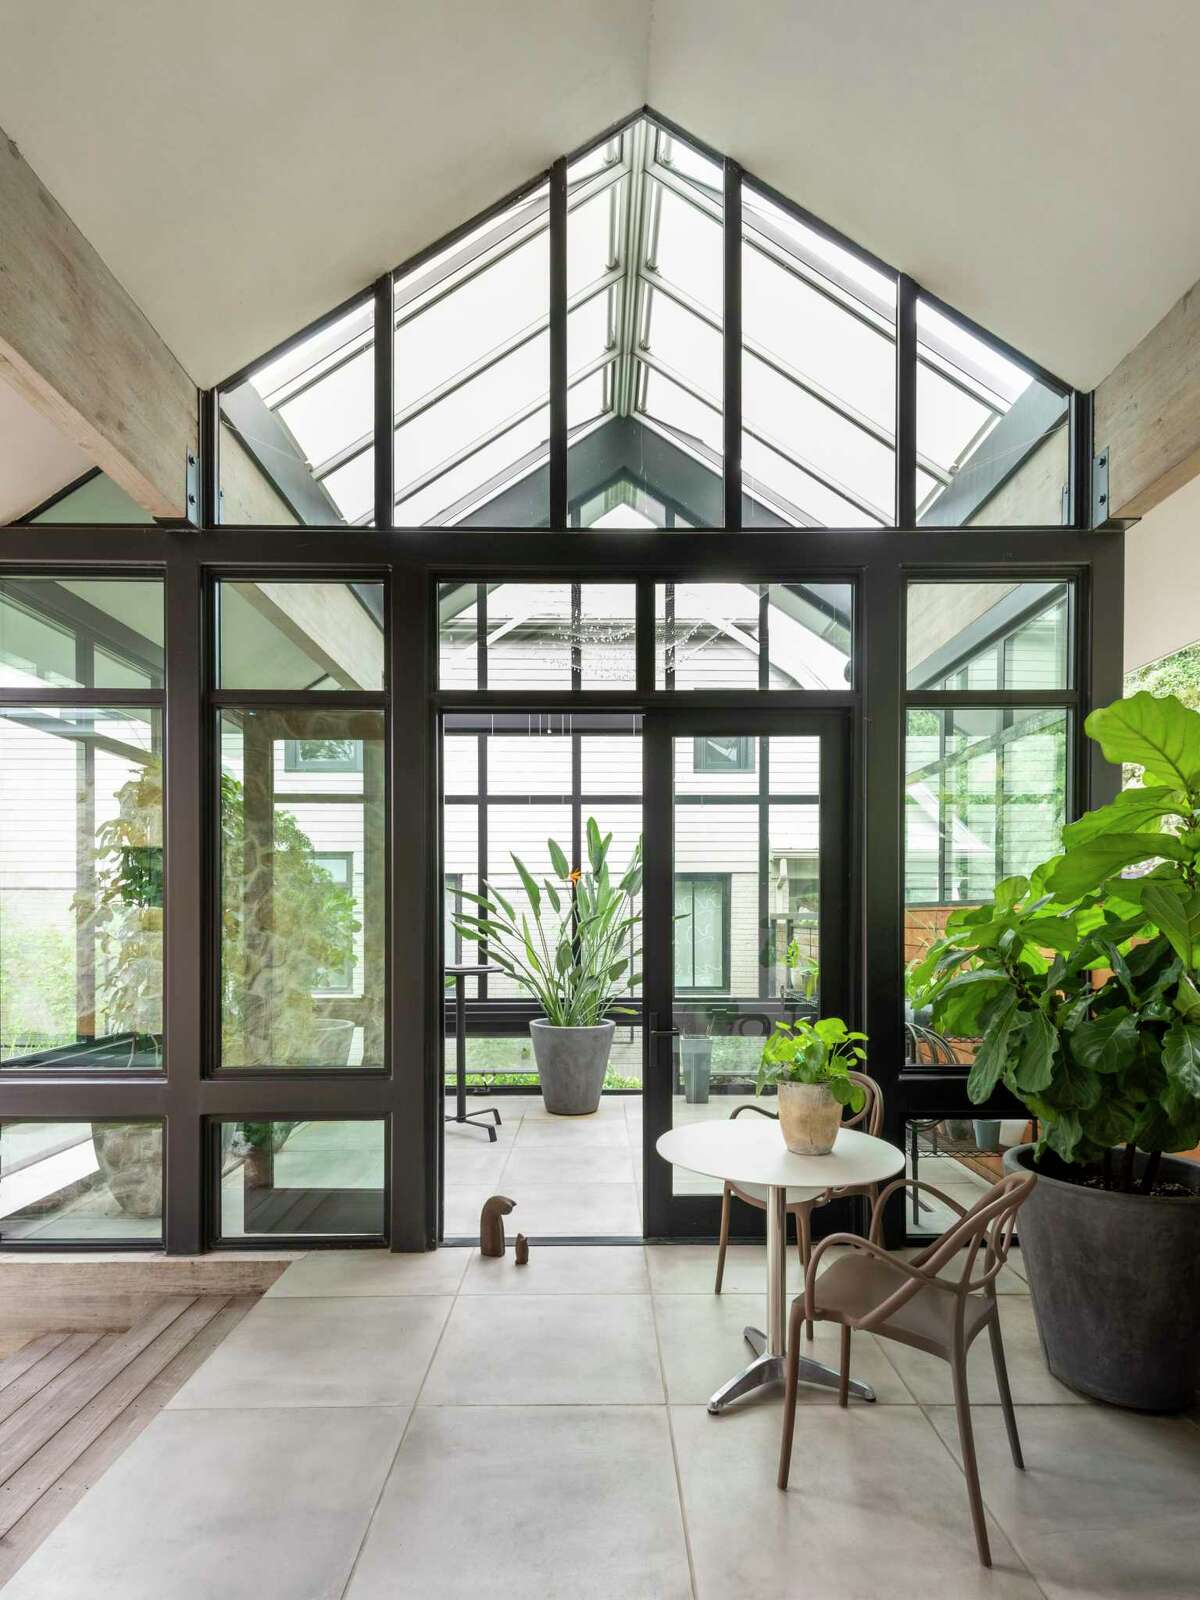 What to look for in this weekend’s AIA Houston Home Tour